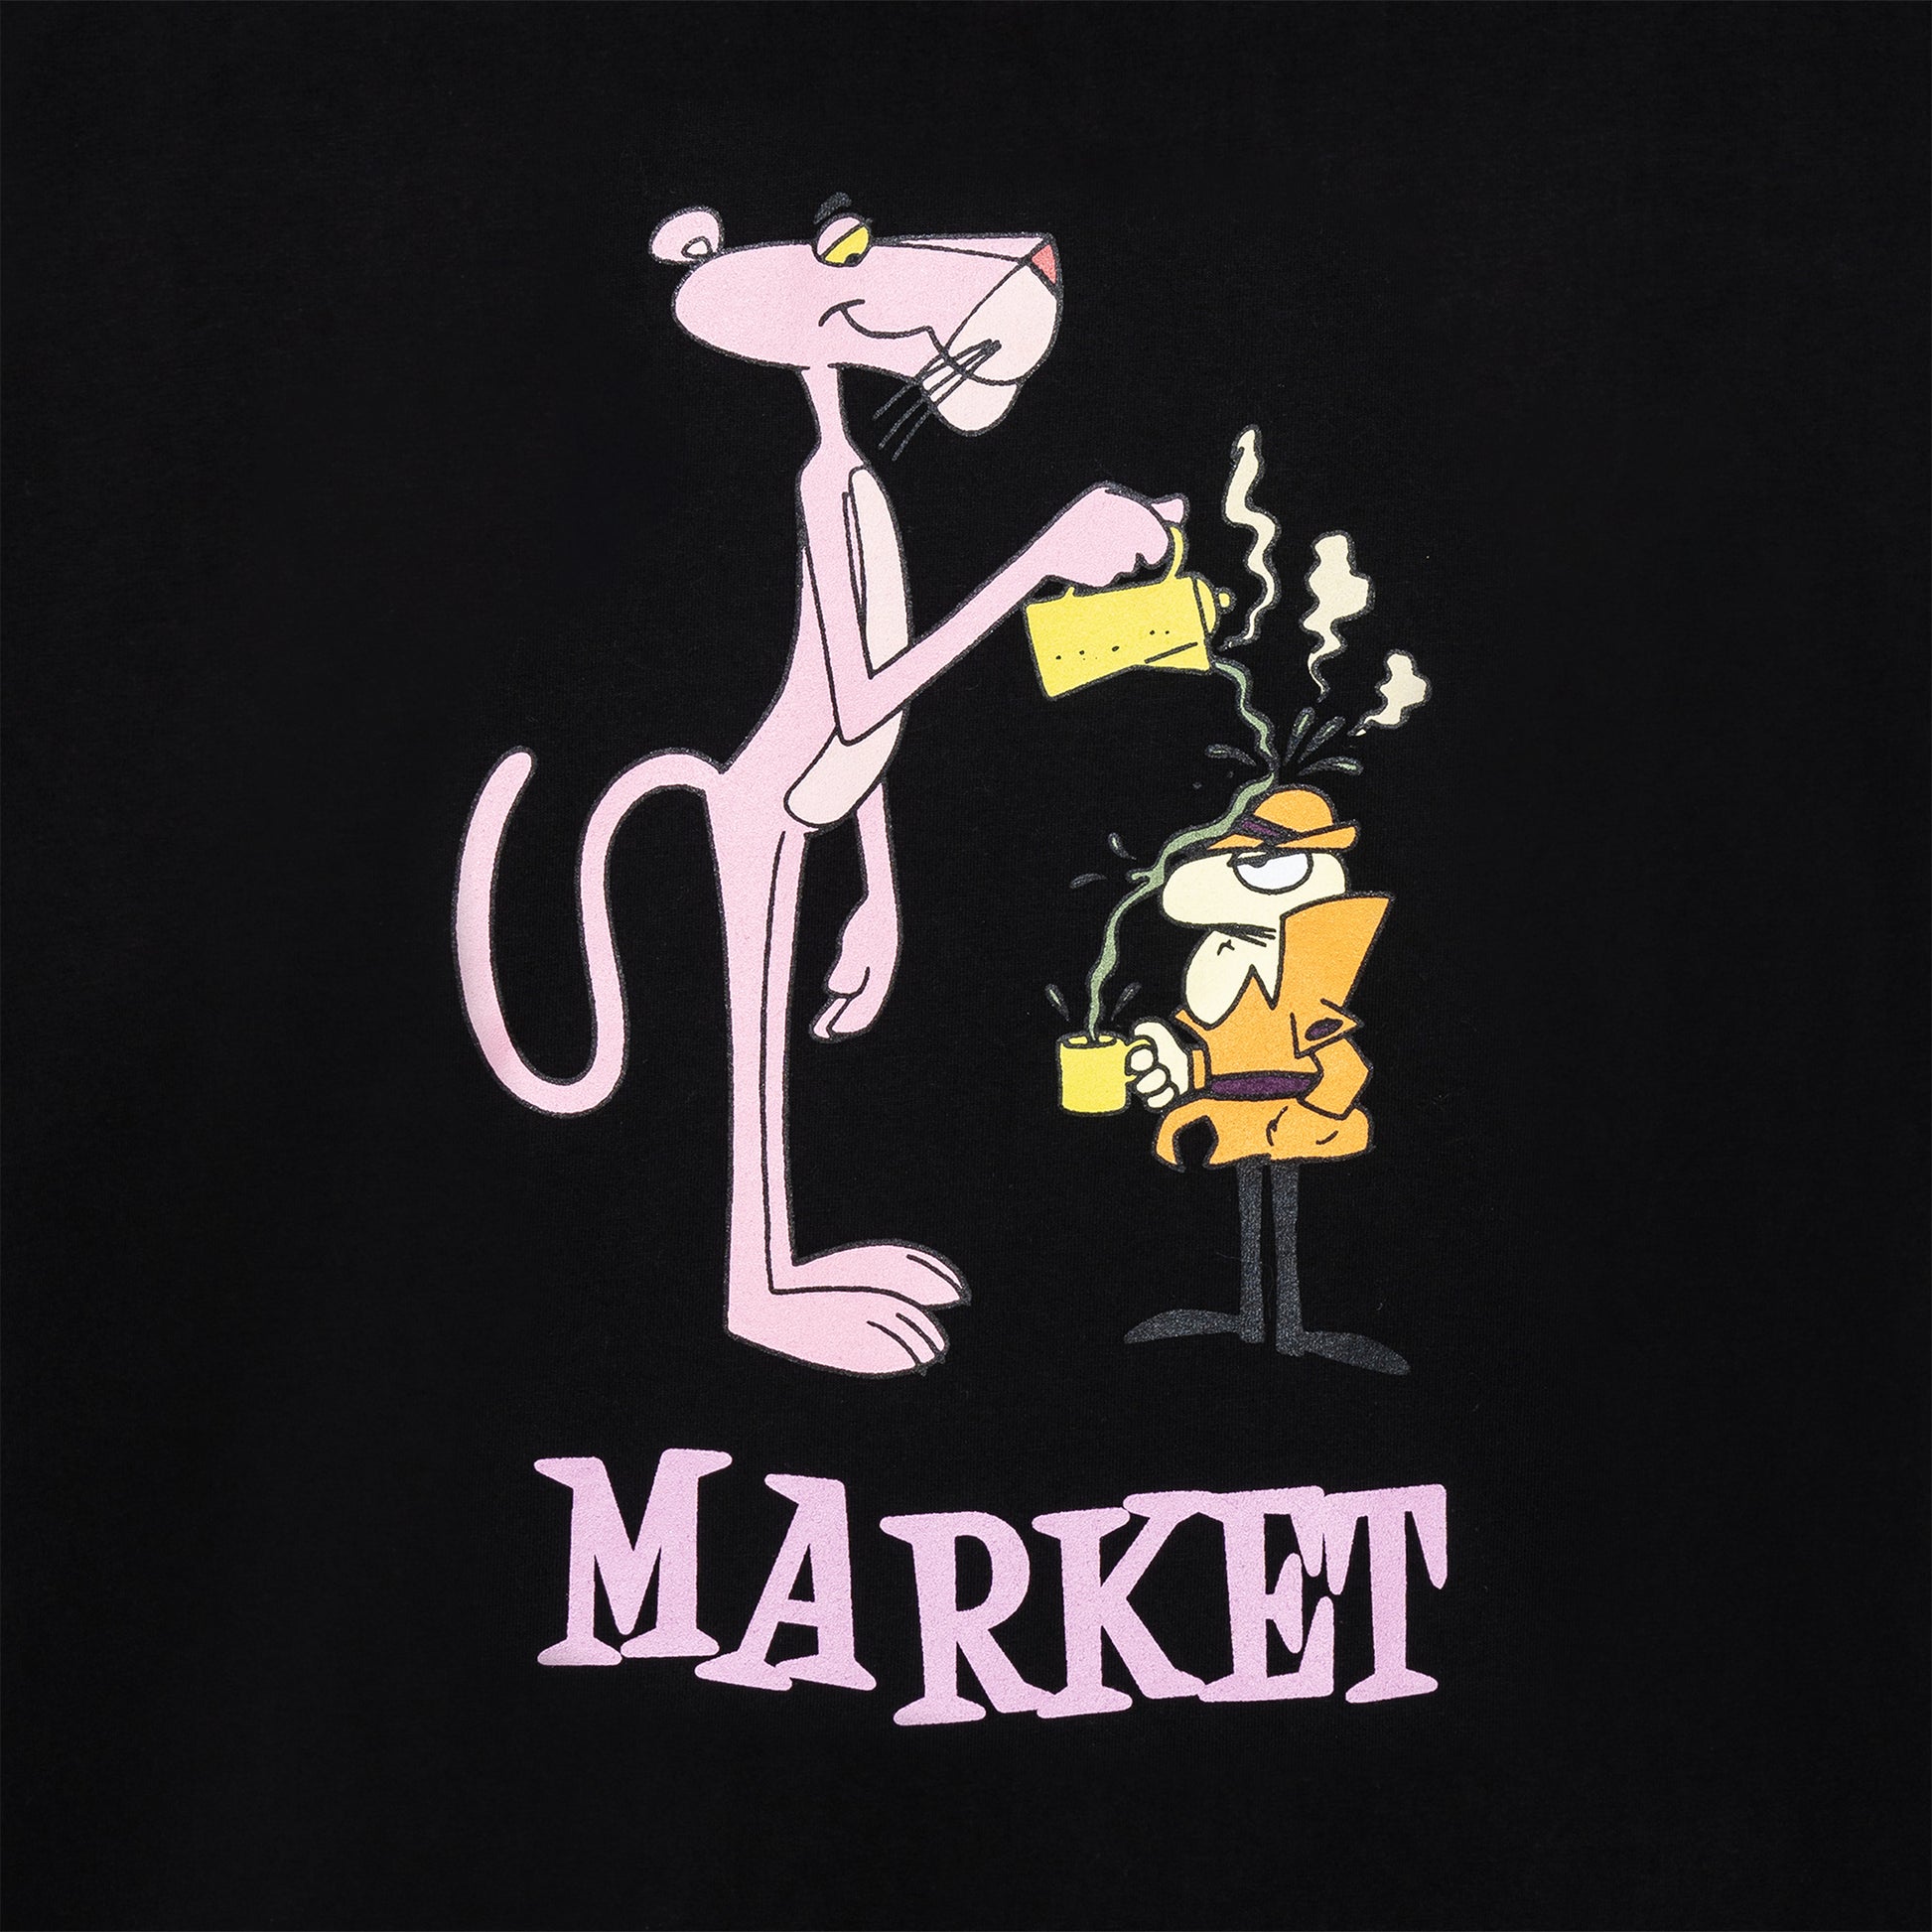 MARKET clothing brand PINK PANTHER POUROVER T-SHIRT. Find more graphic tees, hats, hoodies and more at MarketStudios.com. Formally Chinatown Market.